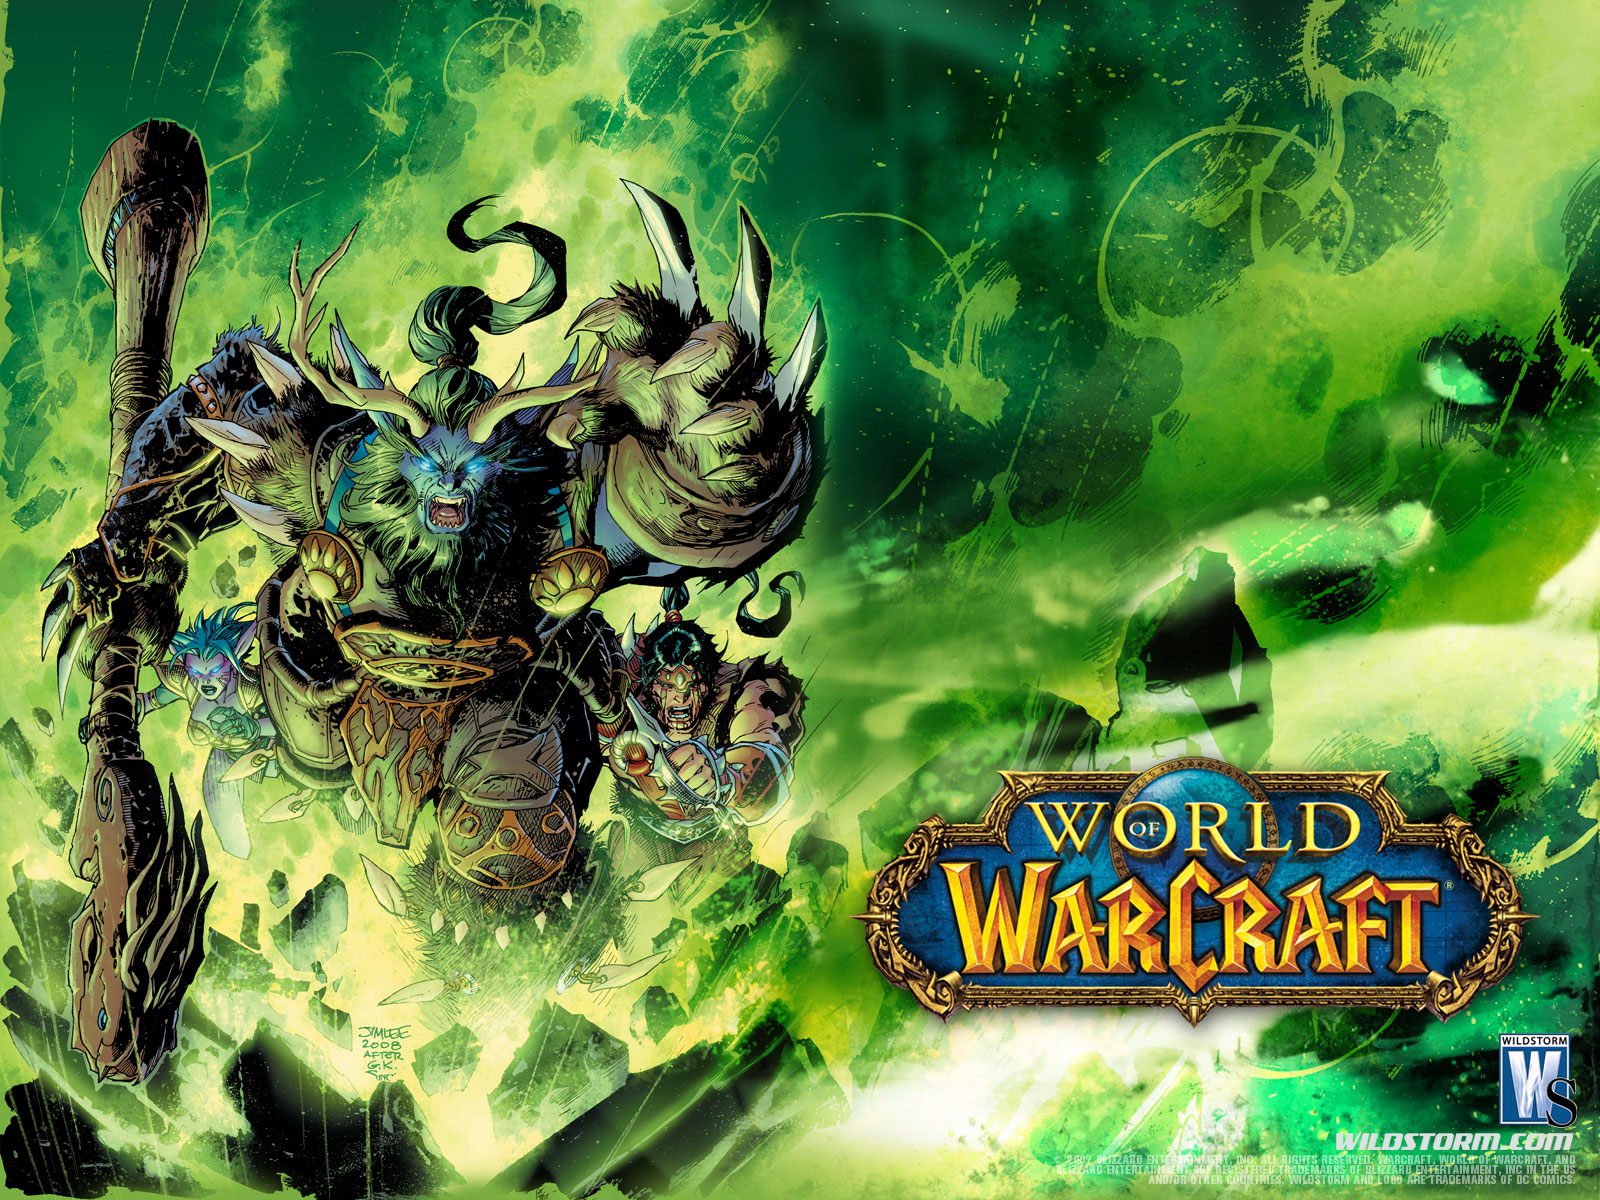 World of Warcraft 110 wallpaper from World of Warcraft wallpapers